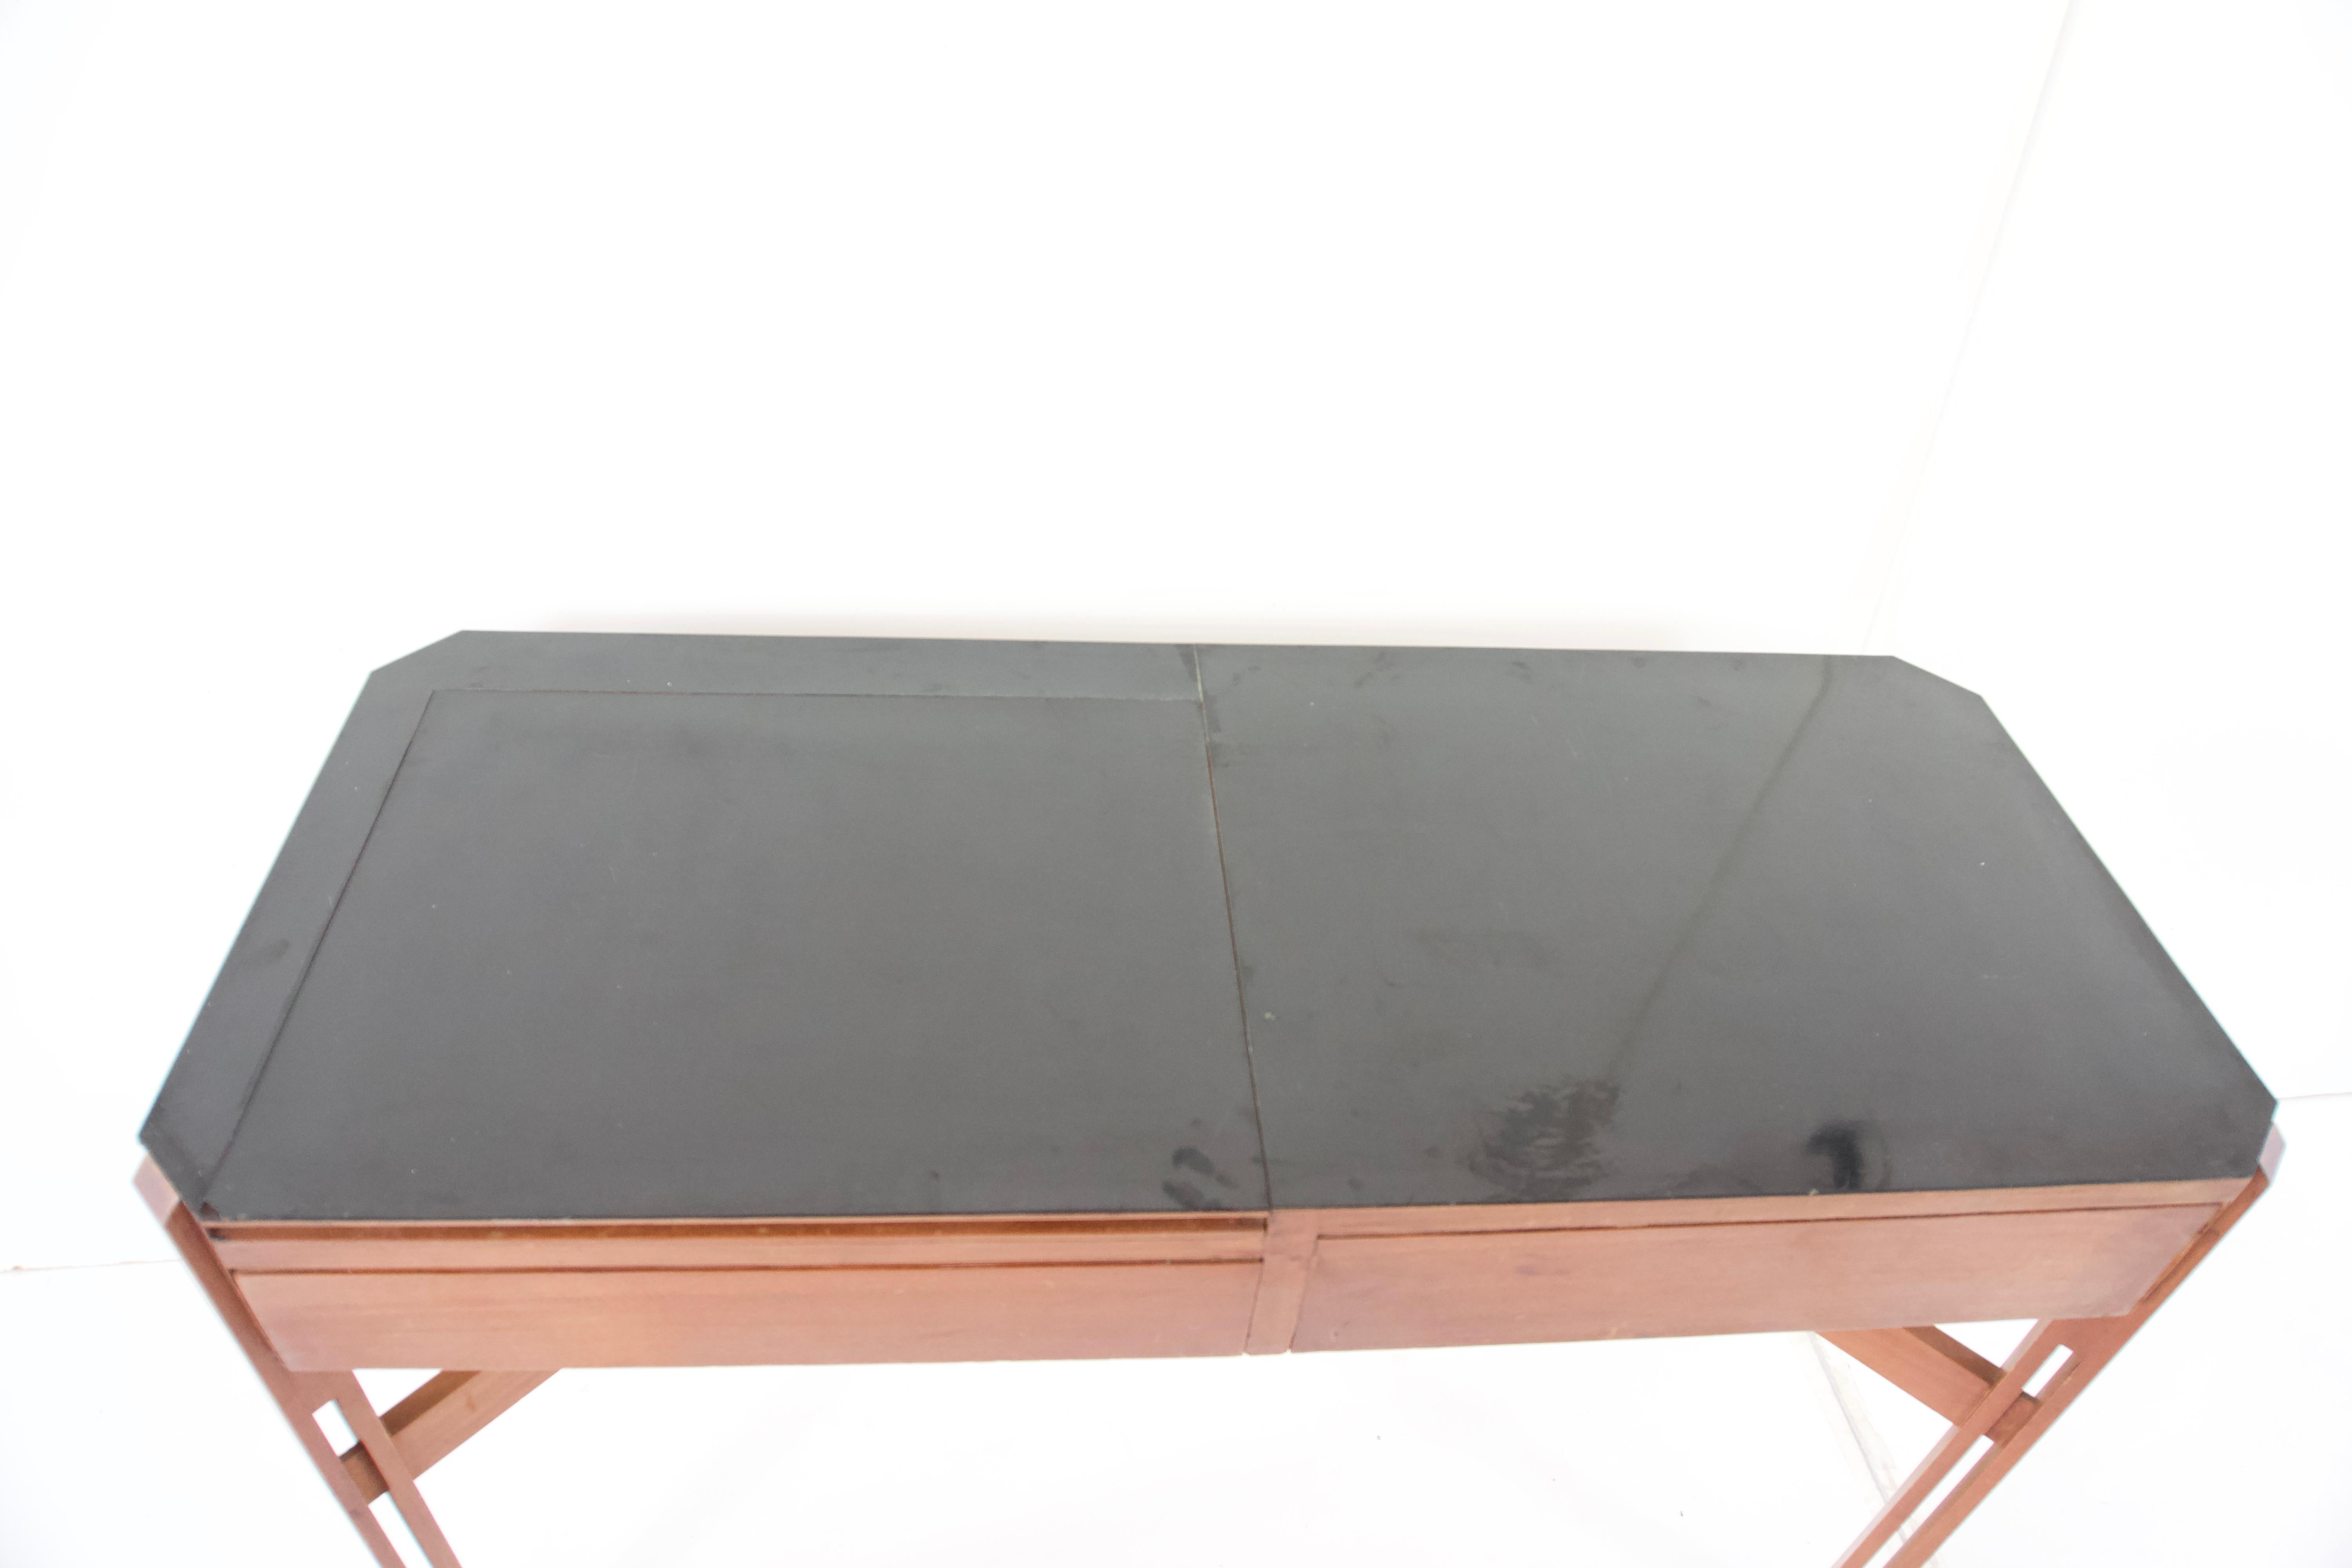 Ico Parisi Rare Large Wood and Laminate Desk with Mirror, Hotel Lorena, 1959.60 For Sale 3